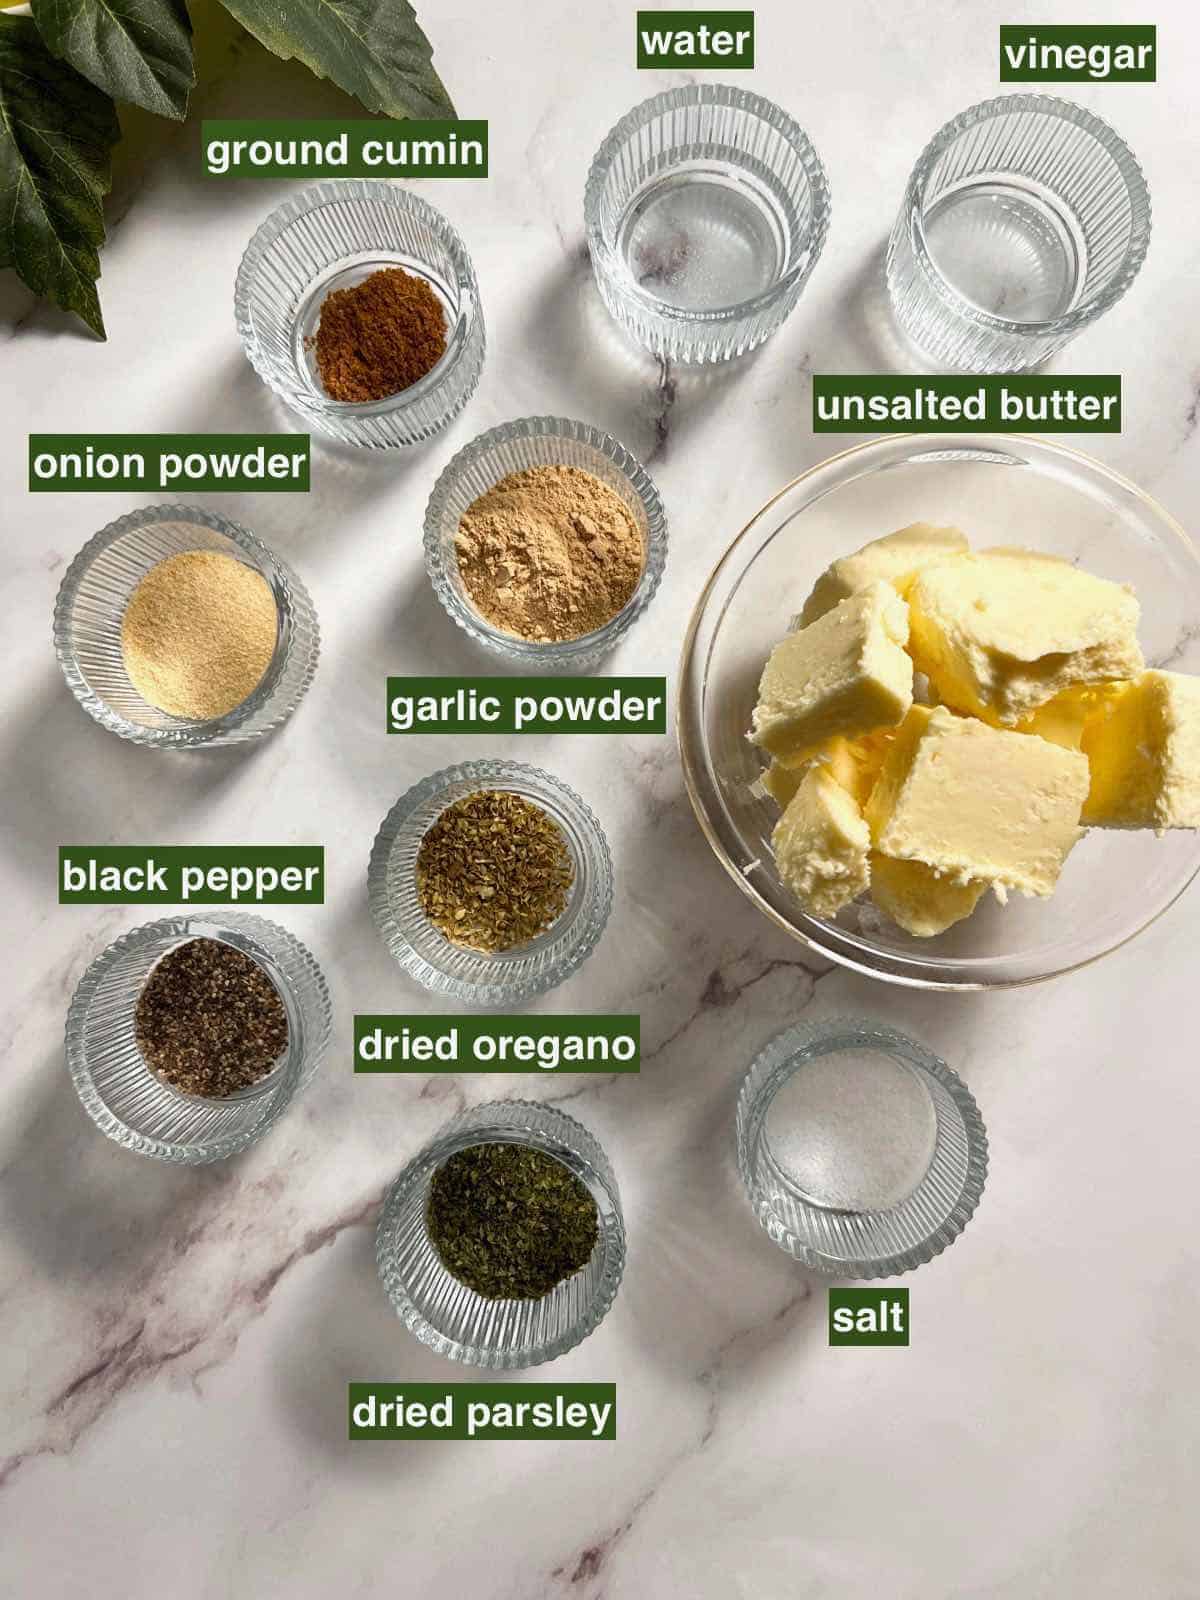 all the ingredients needed for making garlic butter with garlic powder